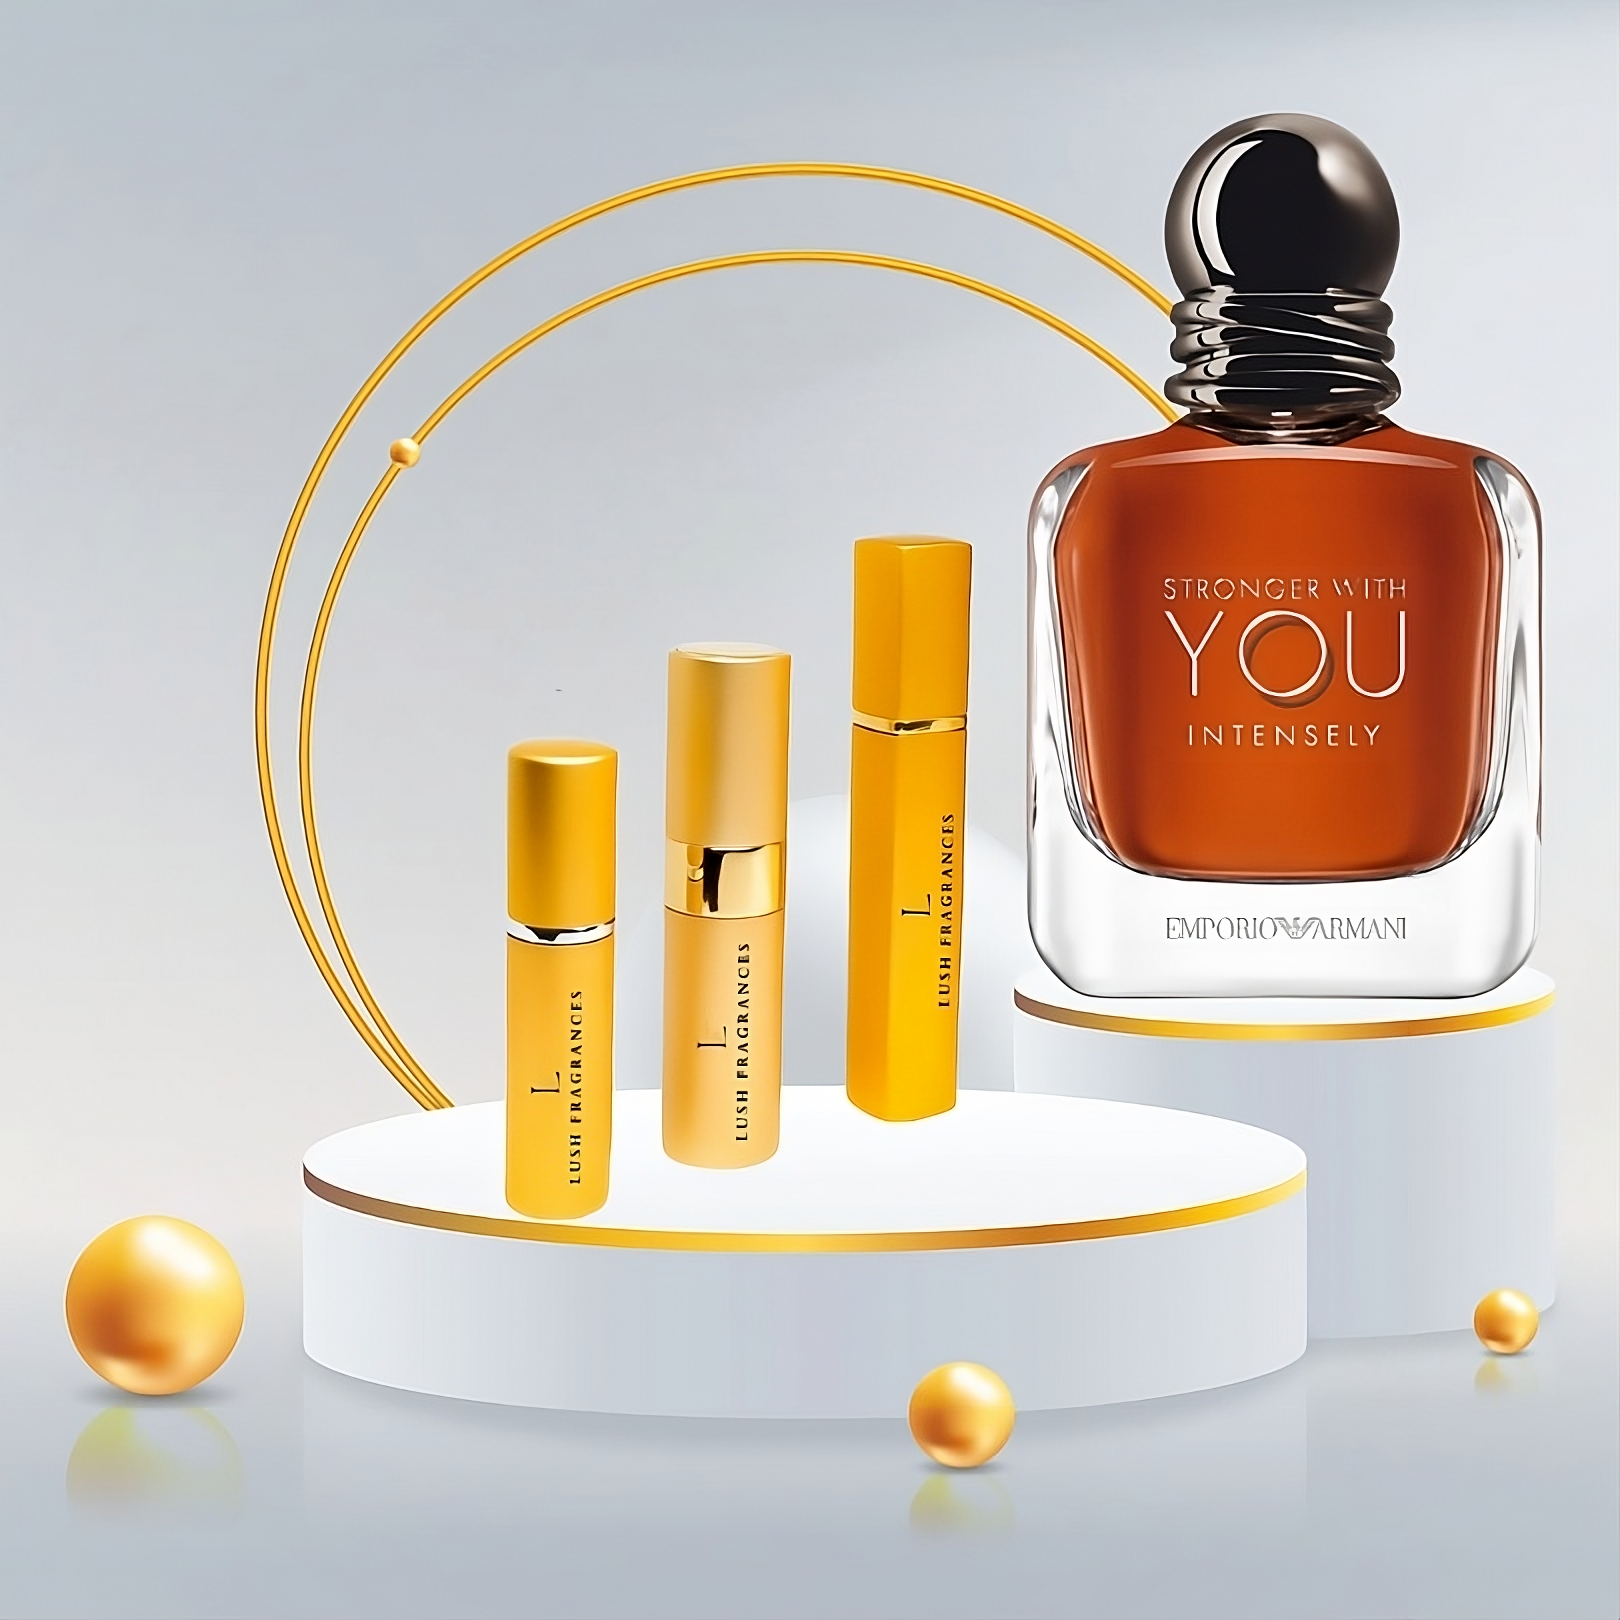 Giorgio Armani Stronger With You Intensely (Refillables)